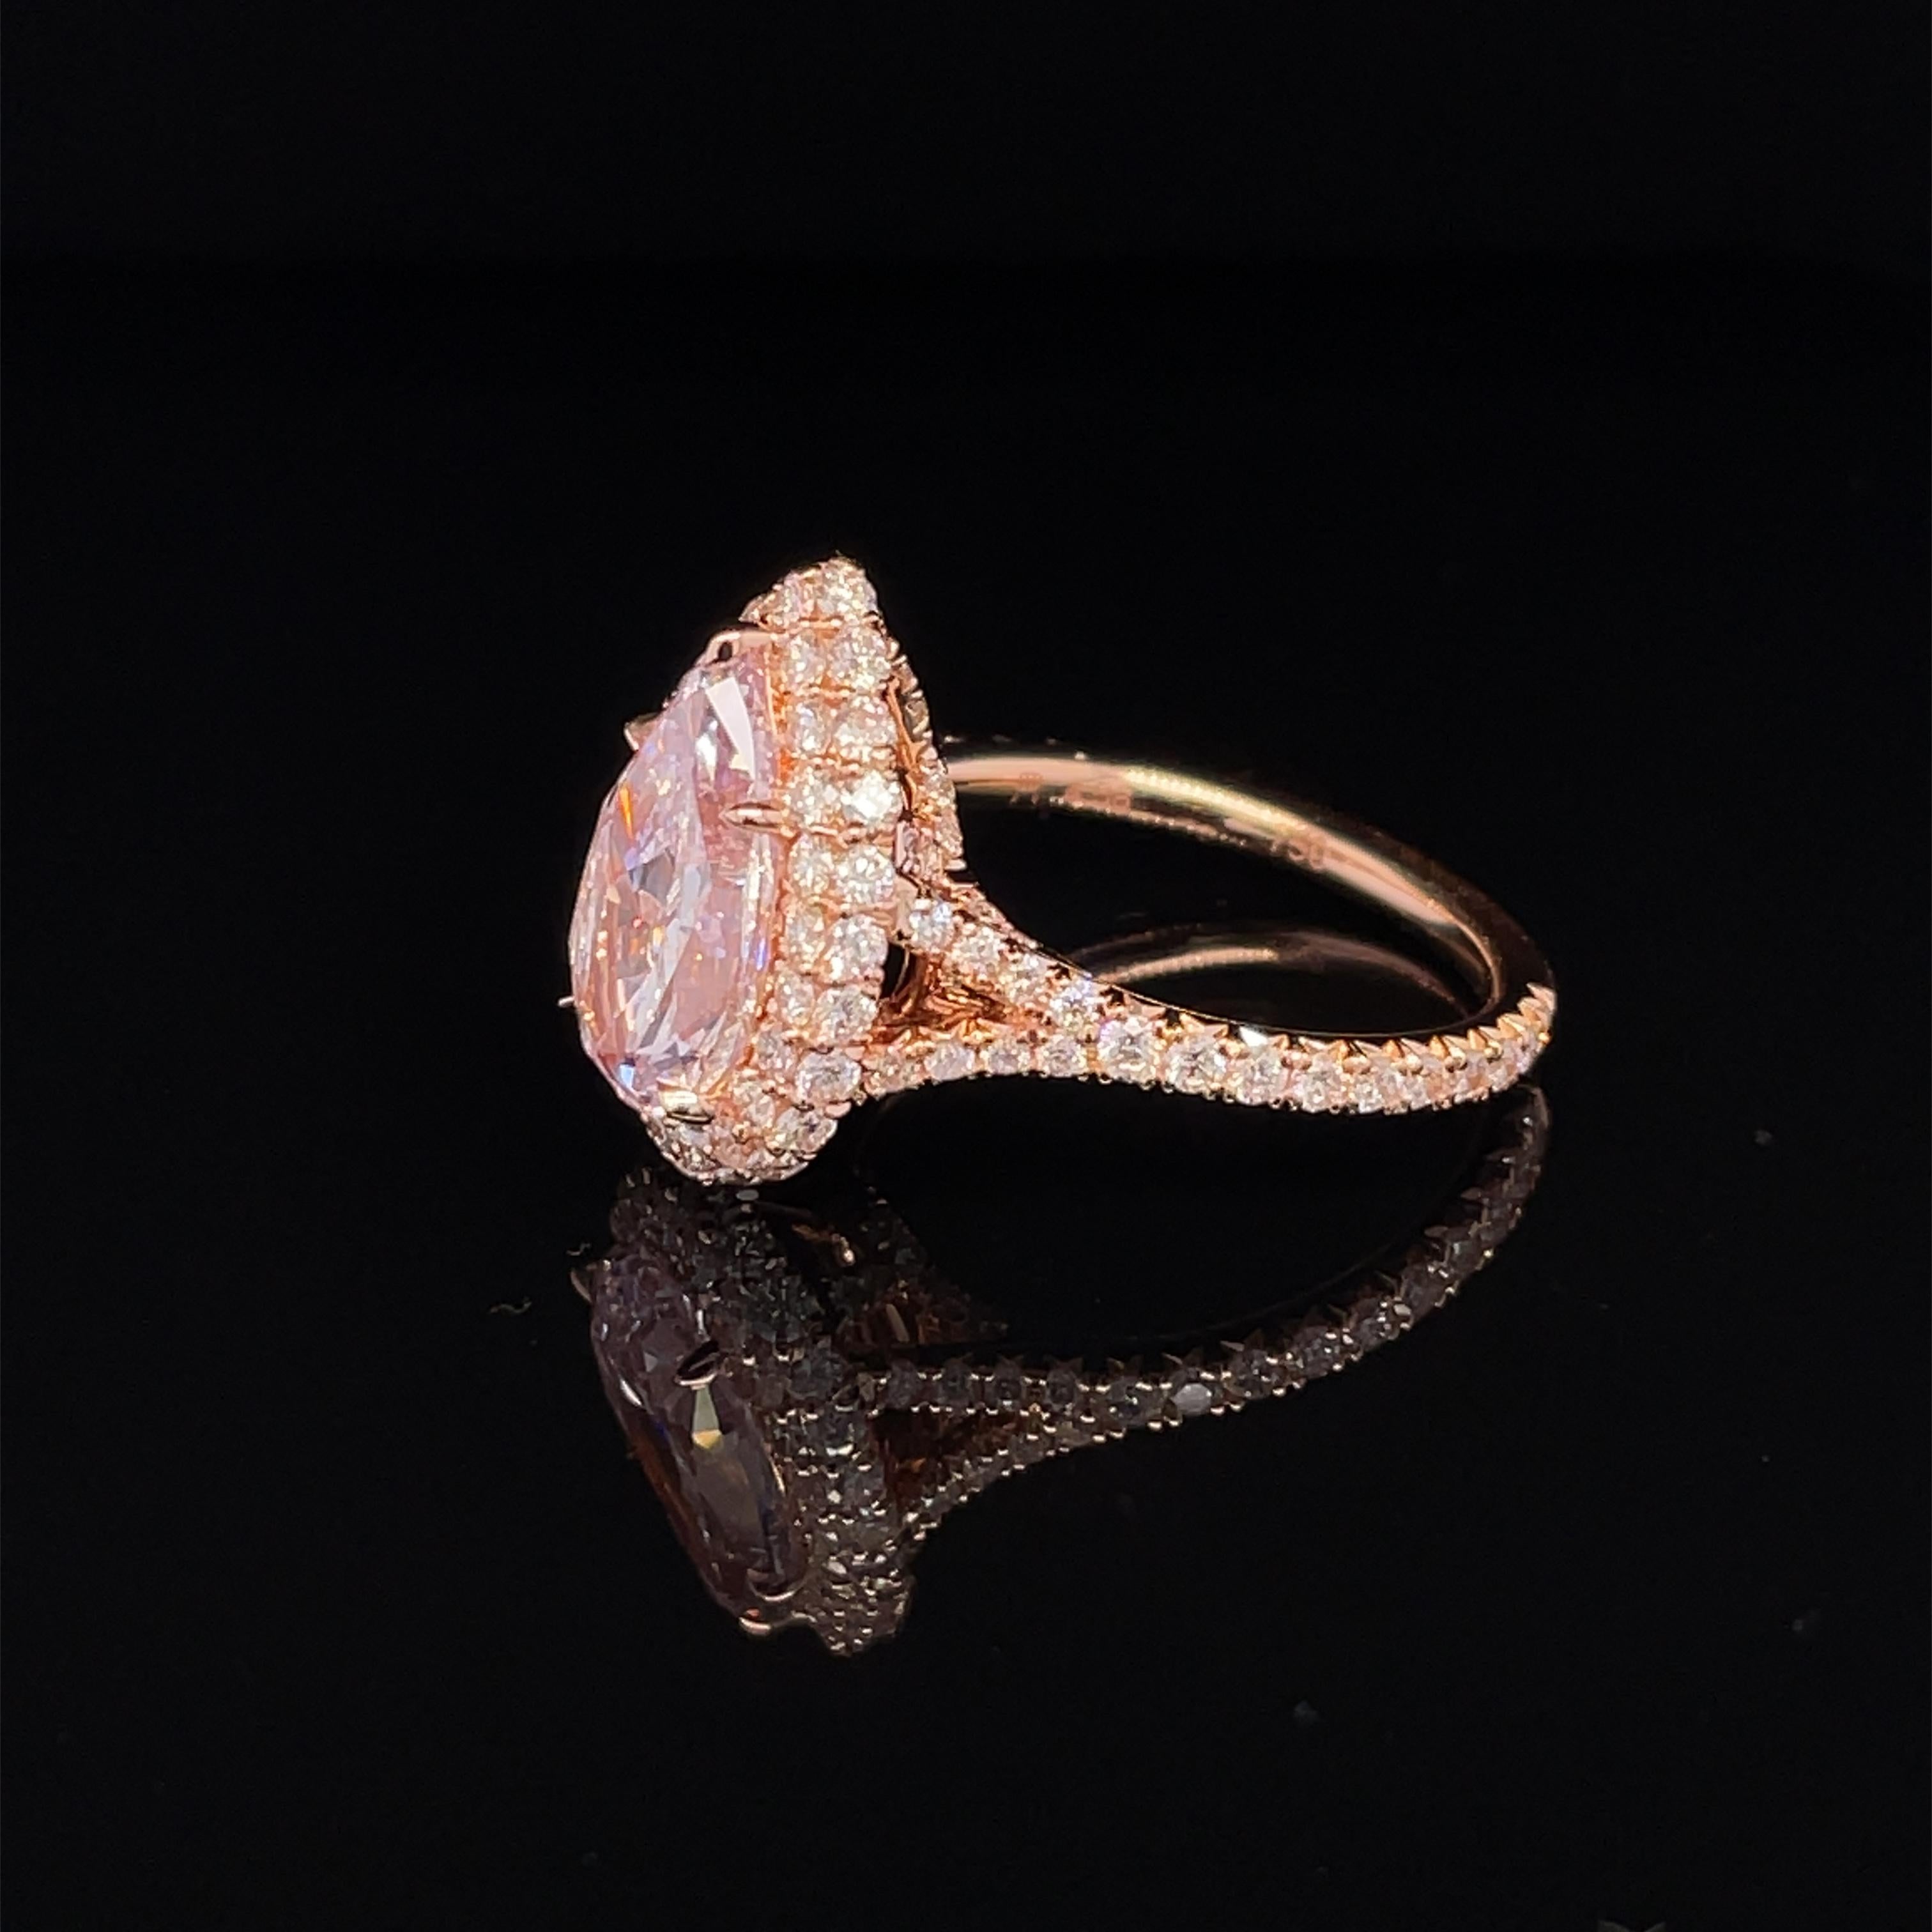 This beautiful 3.04ct natural Light Pink Diamond is 18K Rose gold halo diamond ring set with + 110 PSC Round diamonds = 1.27cttw
GIA Certificate#5211824625 

